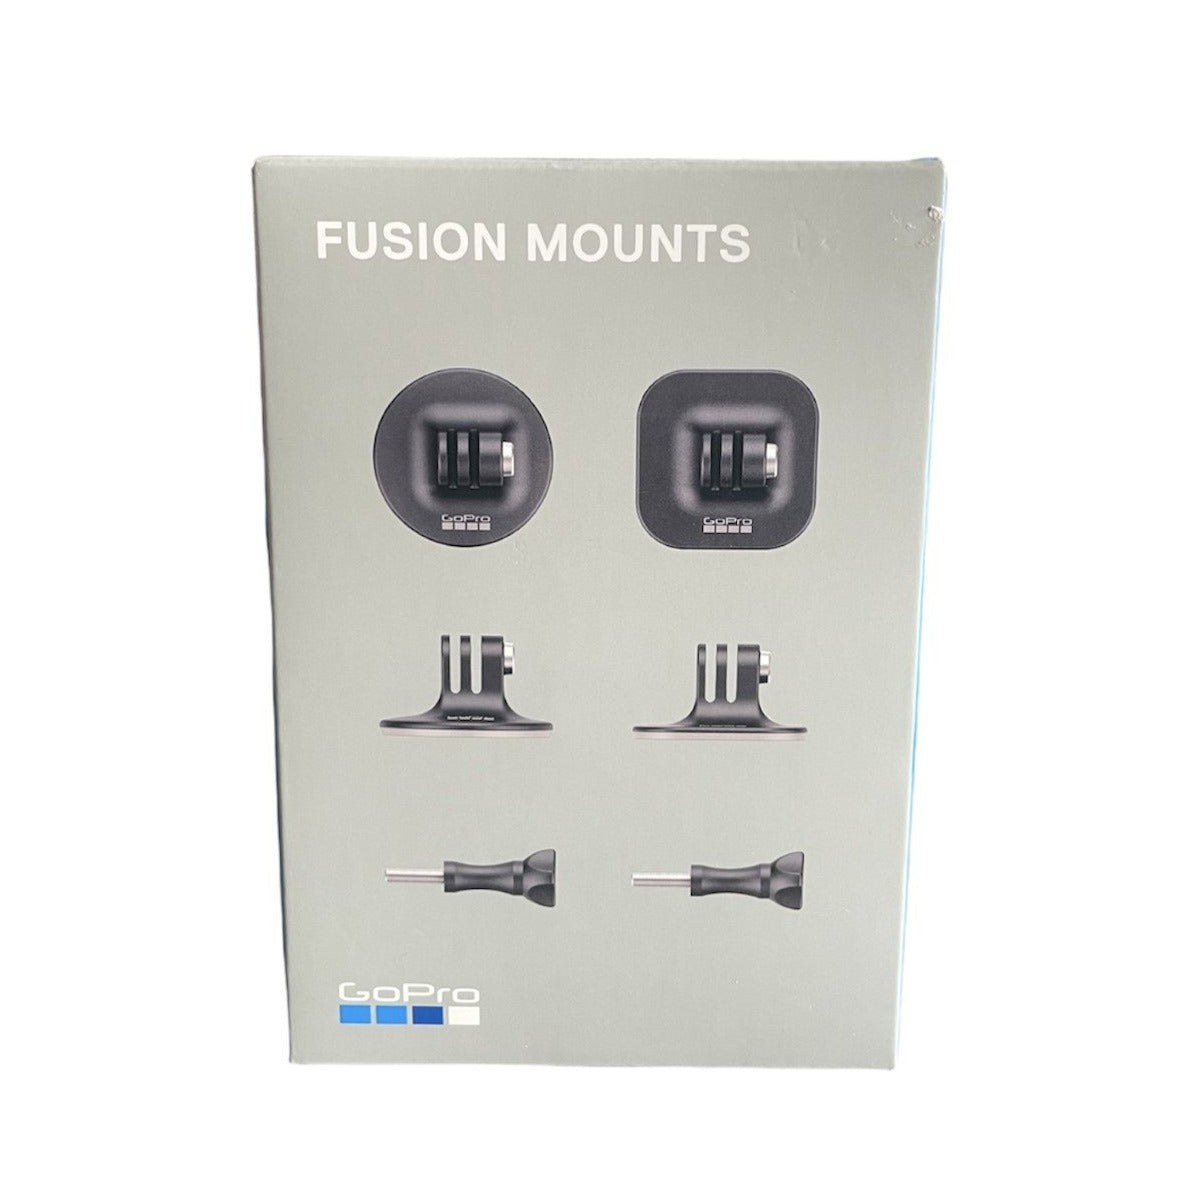 Fusion Mounts For GoPro, deal of the day, black friday deals, bargain, liquidation